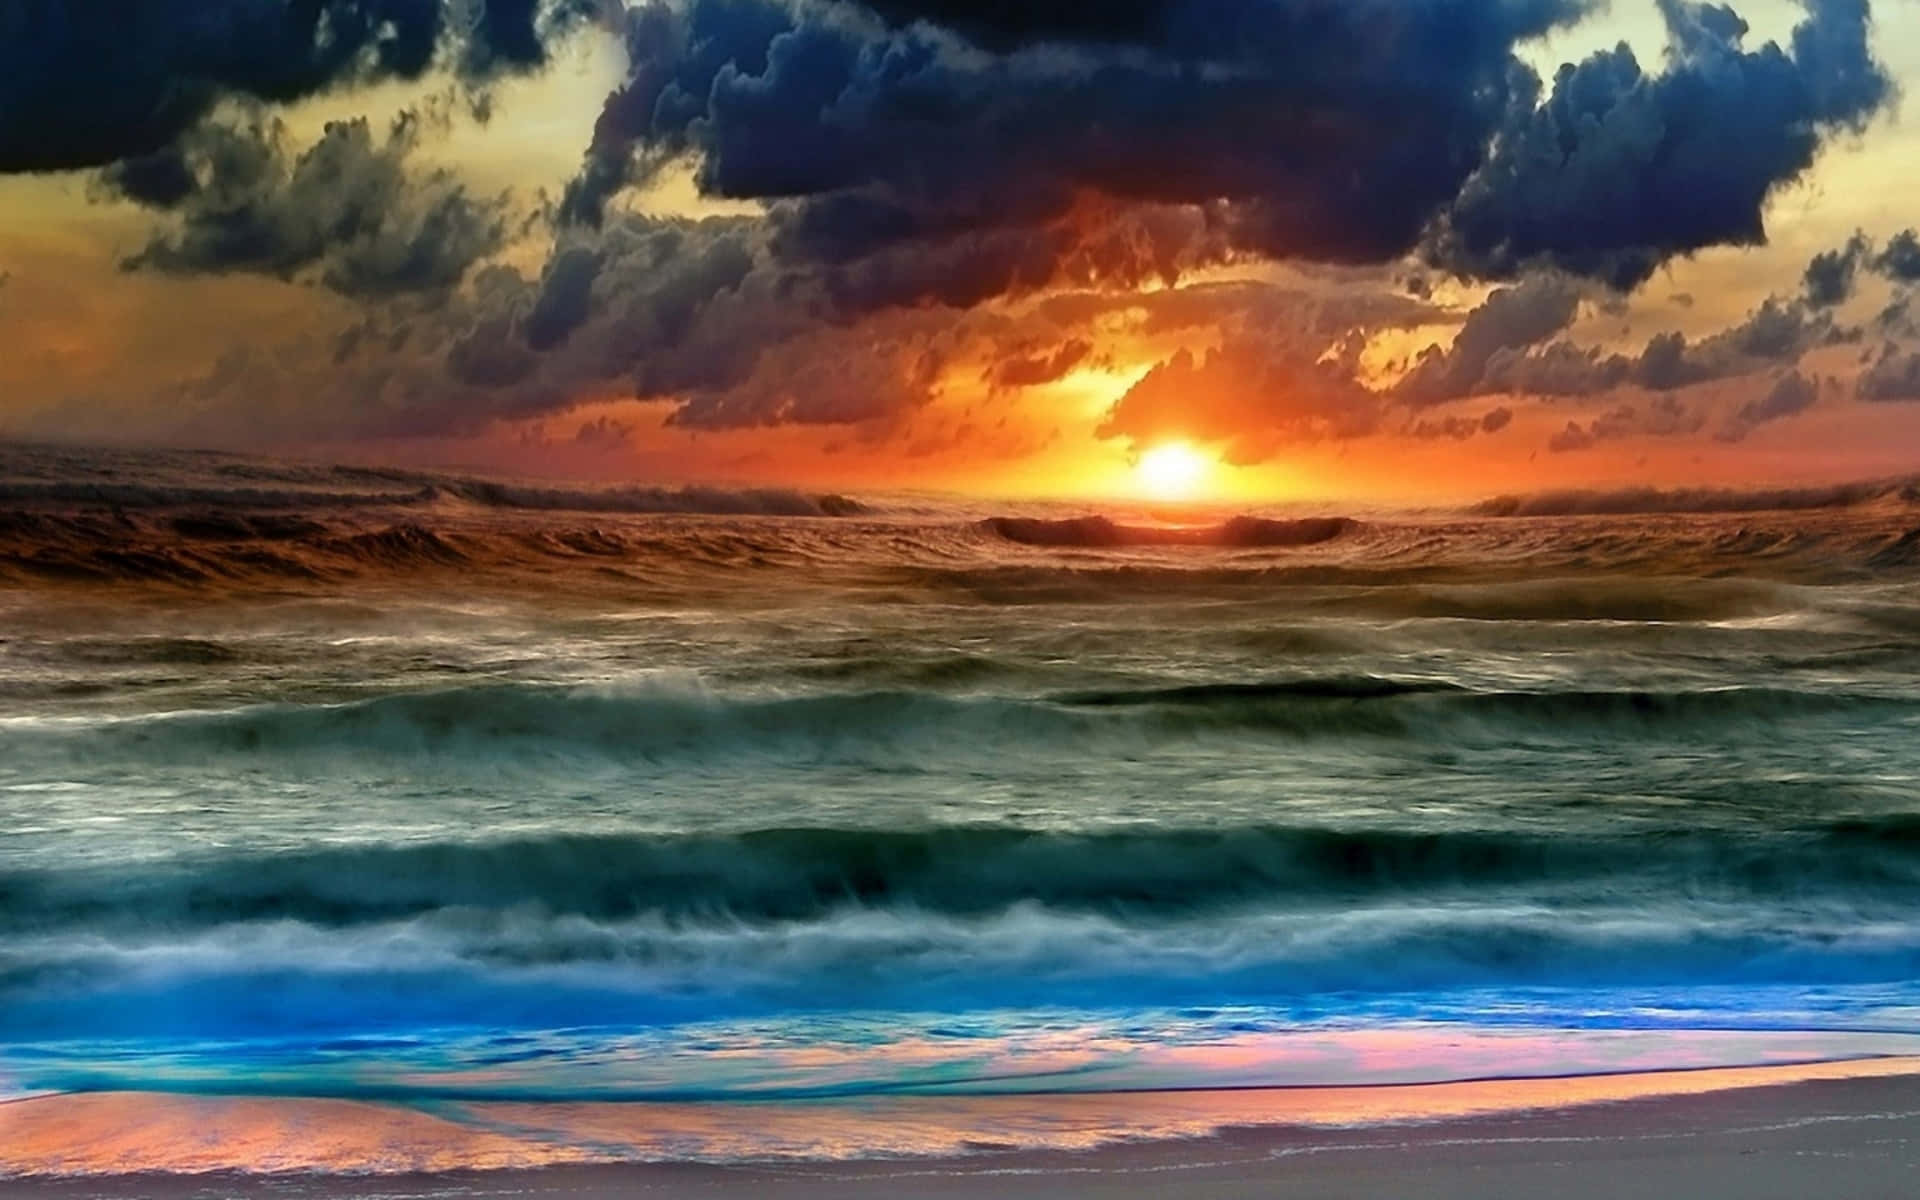 Take an Evening Dip in These Glowing Sunset Waves Wallpaper